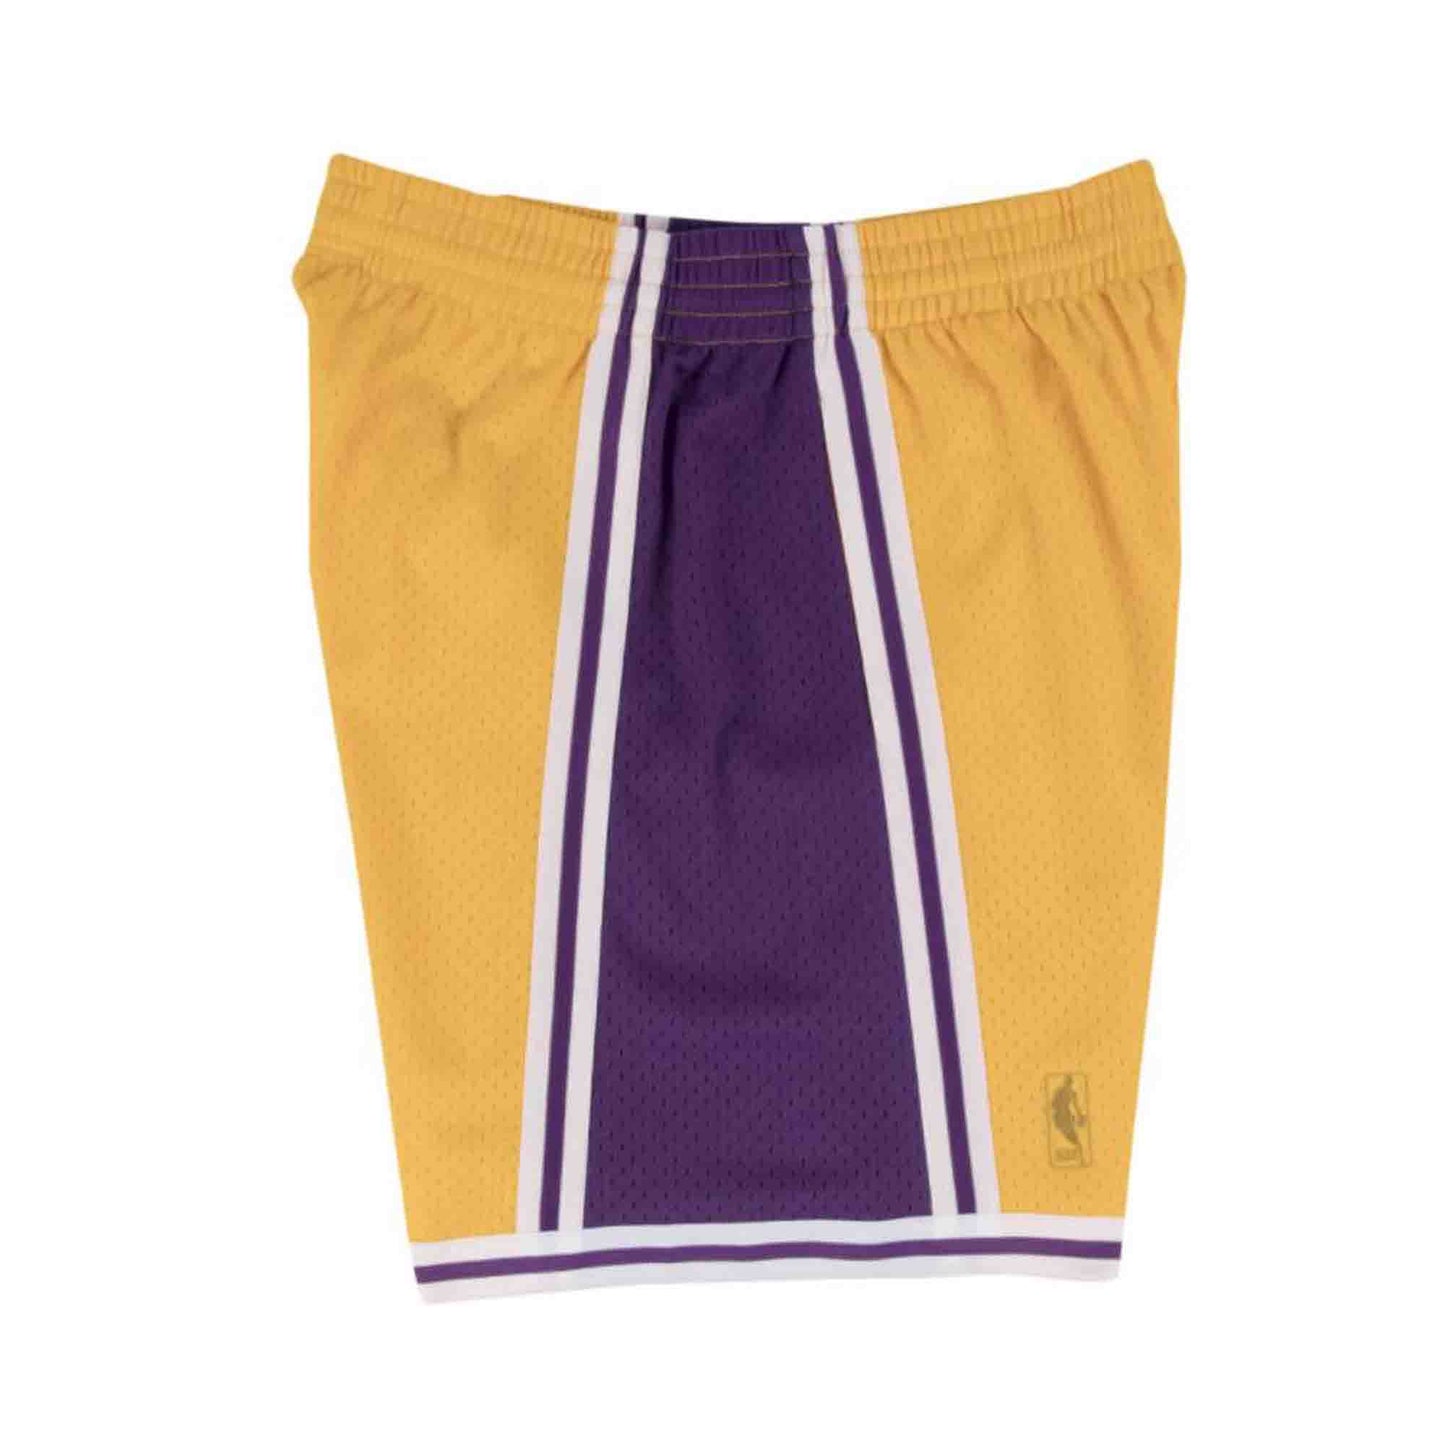 Los Angeles Lakers 1996-97 Home Shorts - Yellow/Purple – Feature